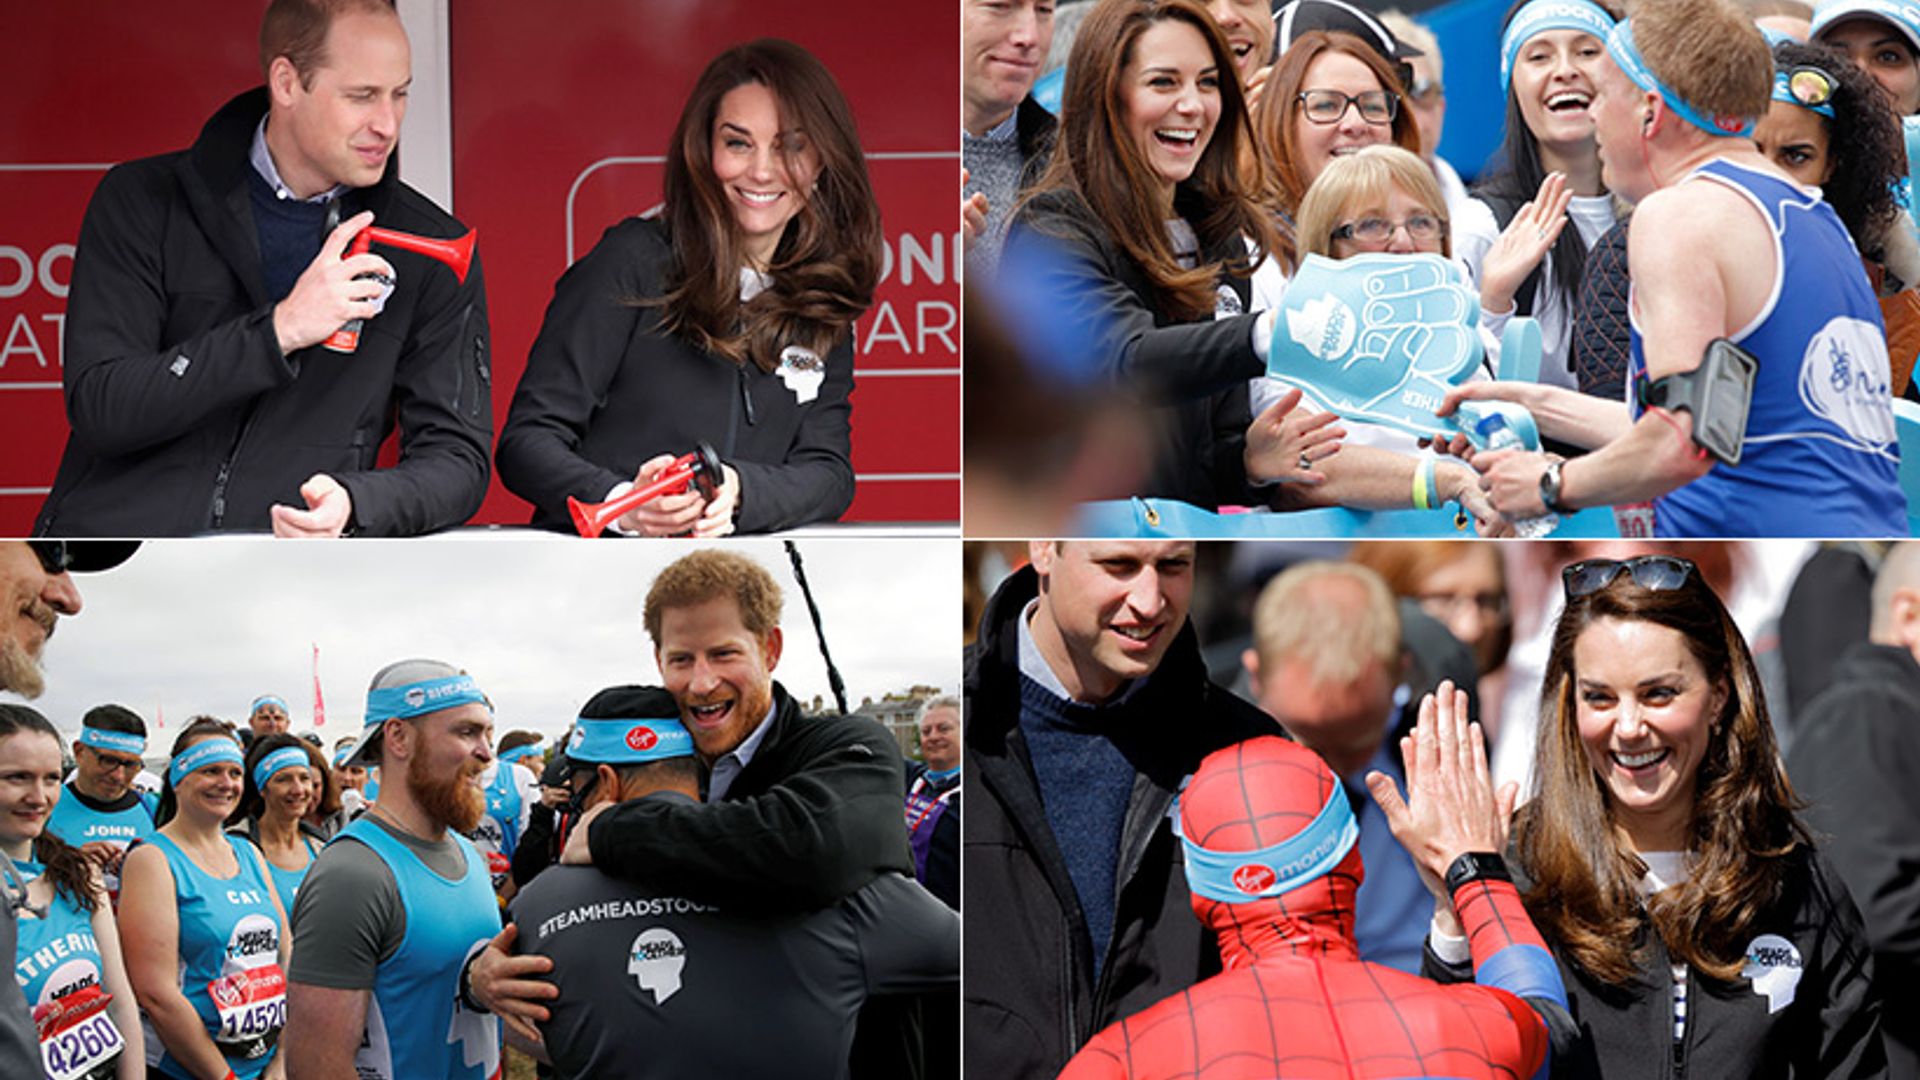 Prince William, Kate and Prince Harry's best photos from the London Marathon